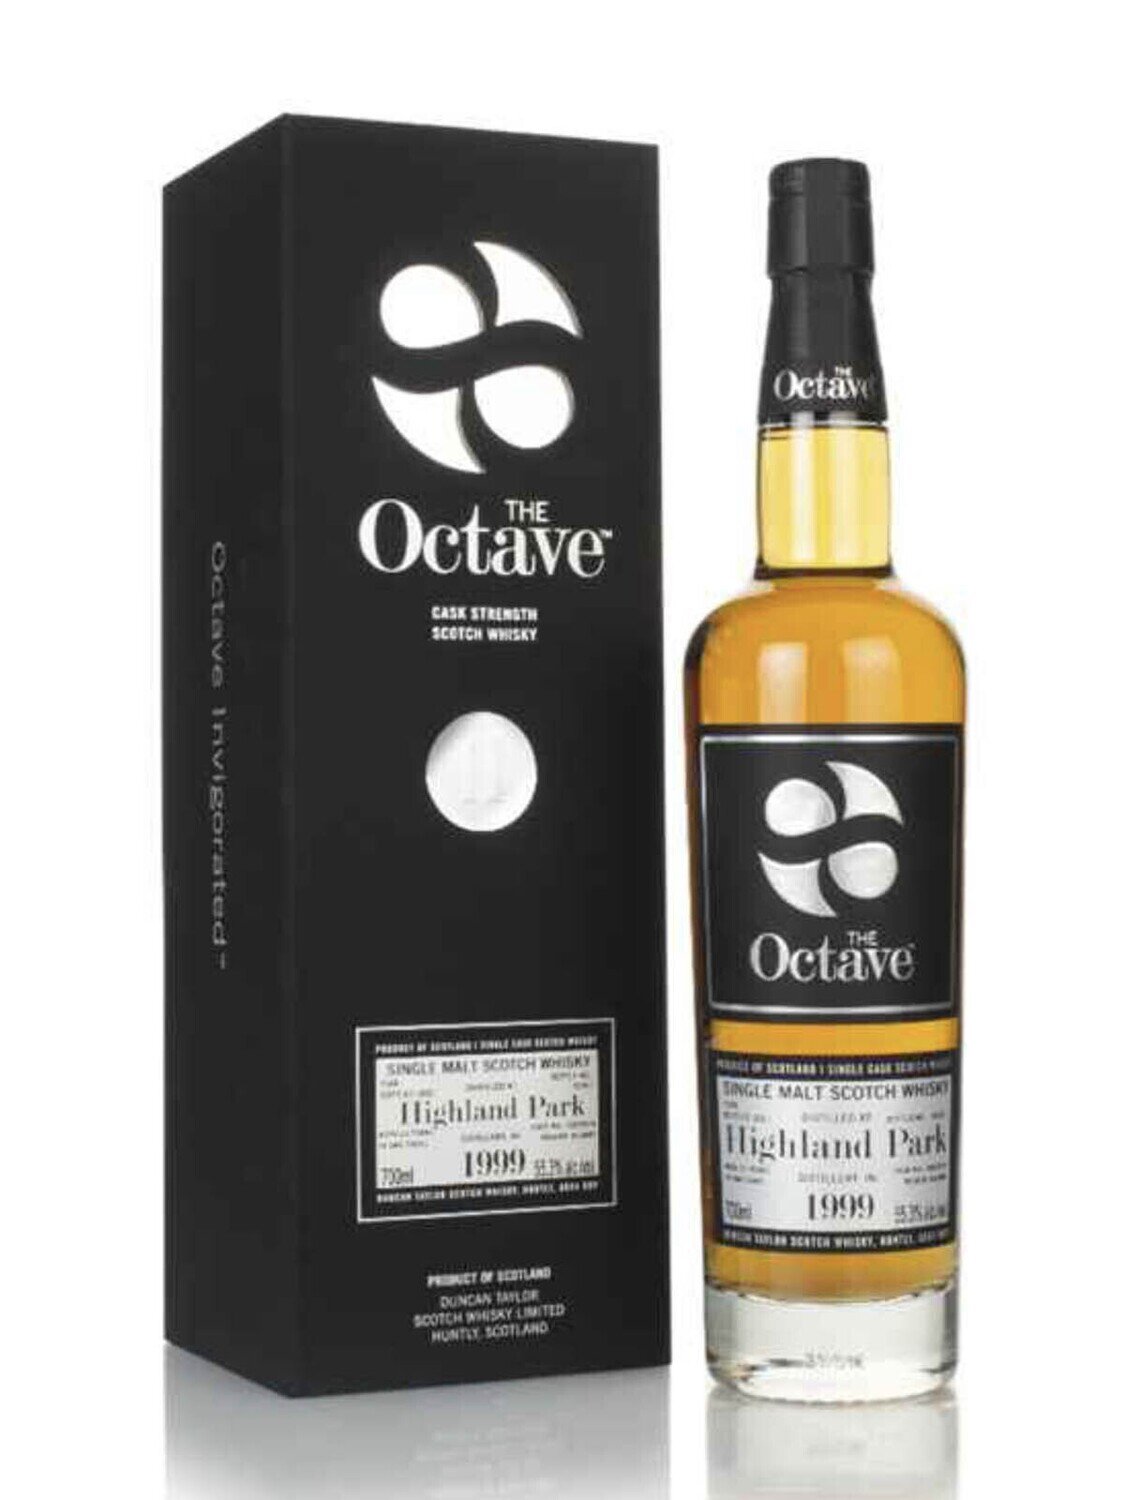 The Octave Highland Park 23 Year Old 1999 Scotch Whisky Cask #5029309 54.2% ABV 750mL